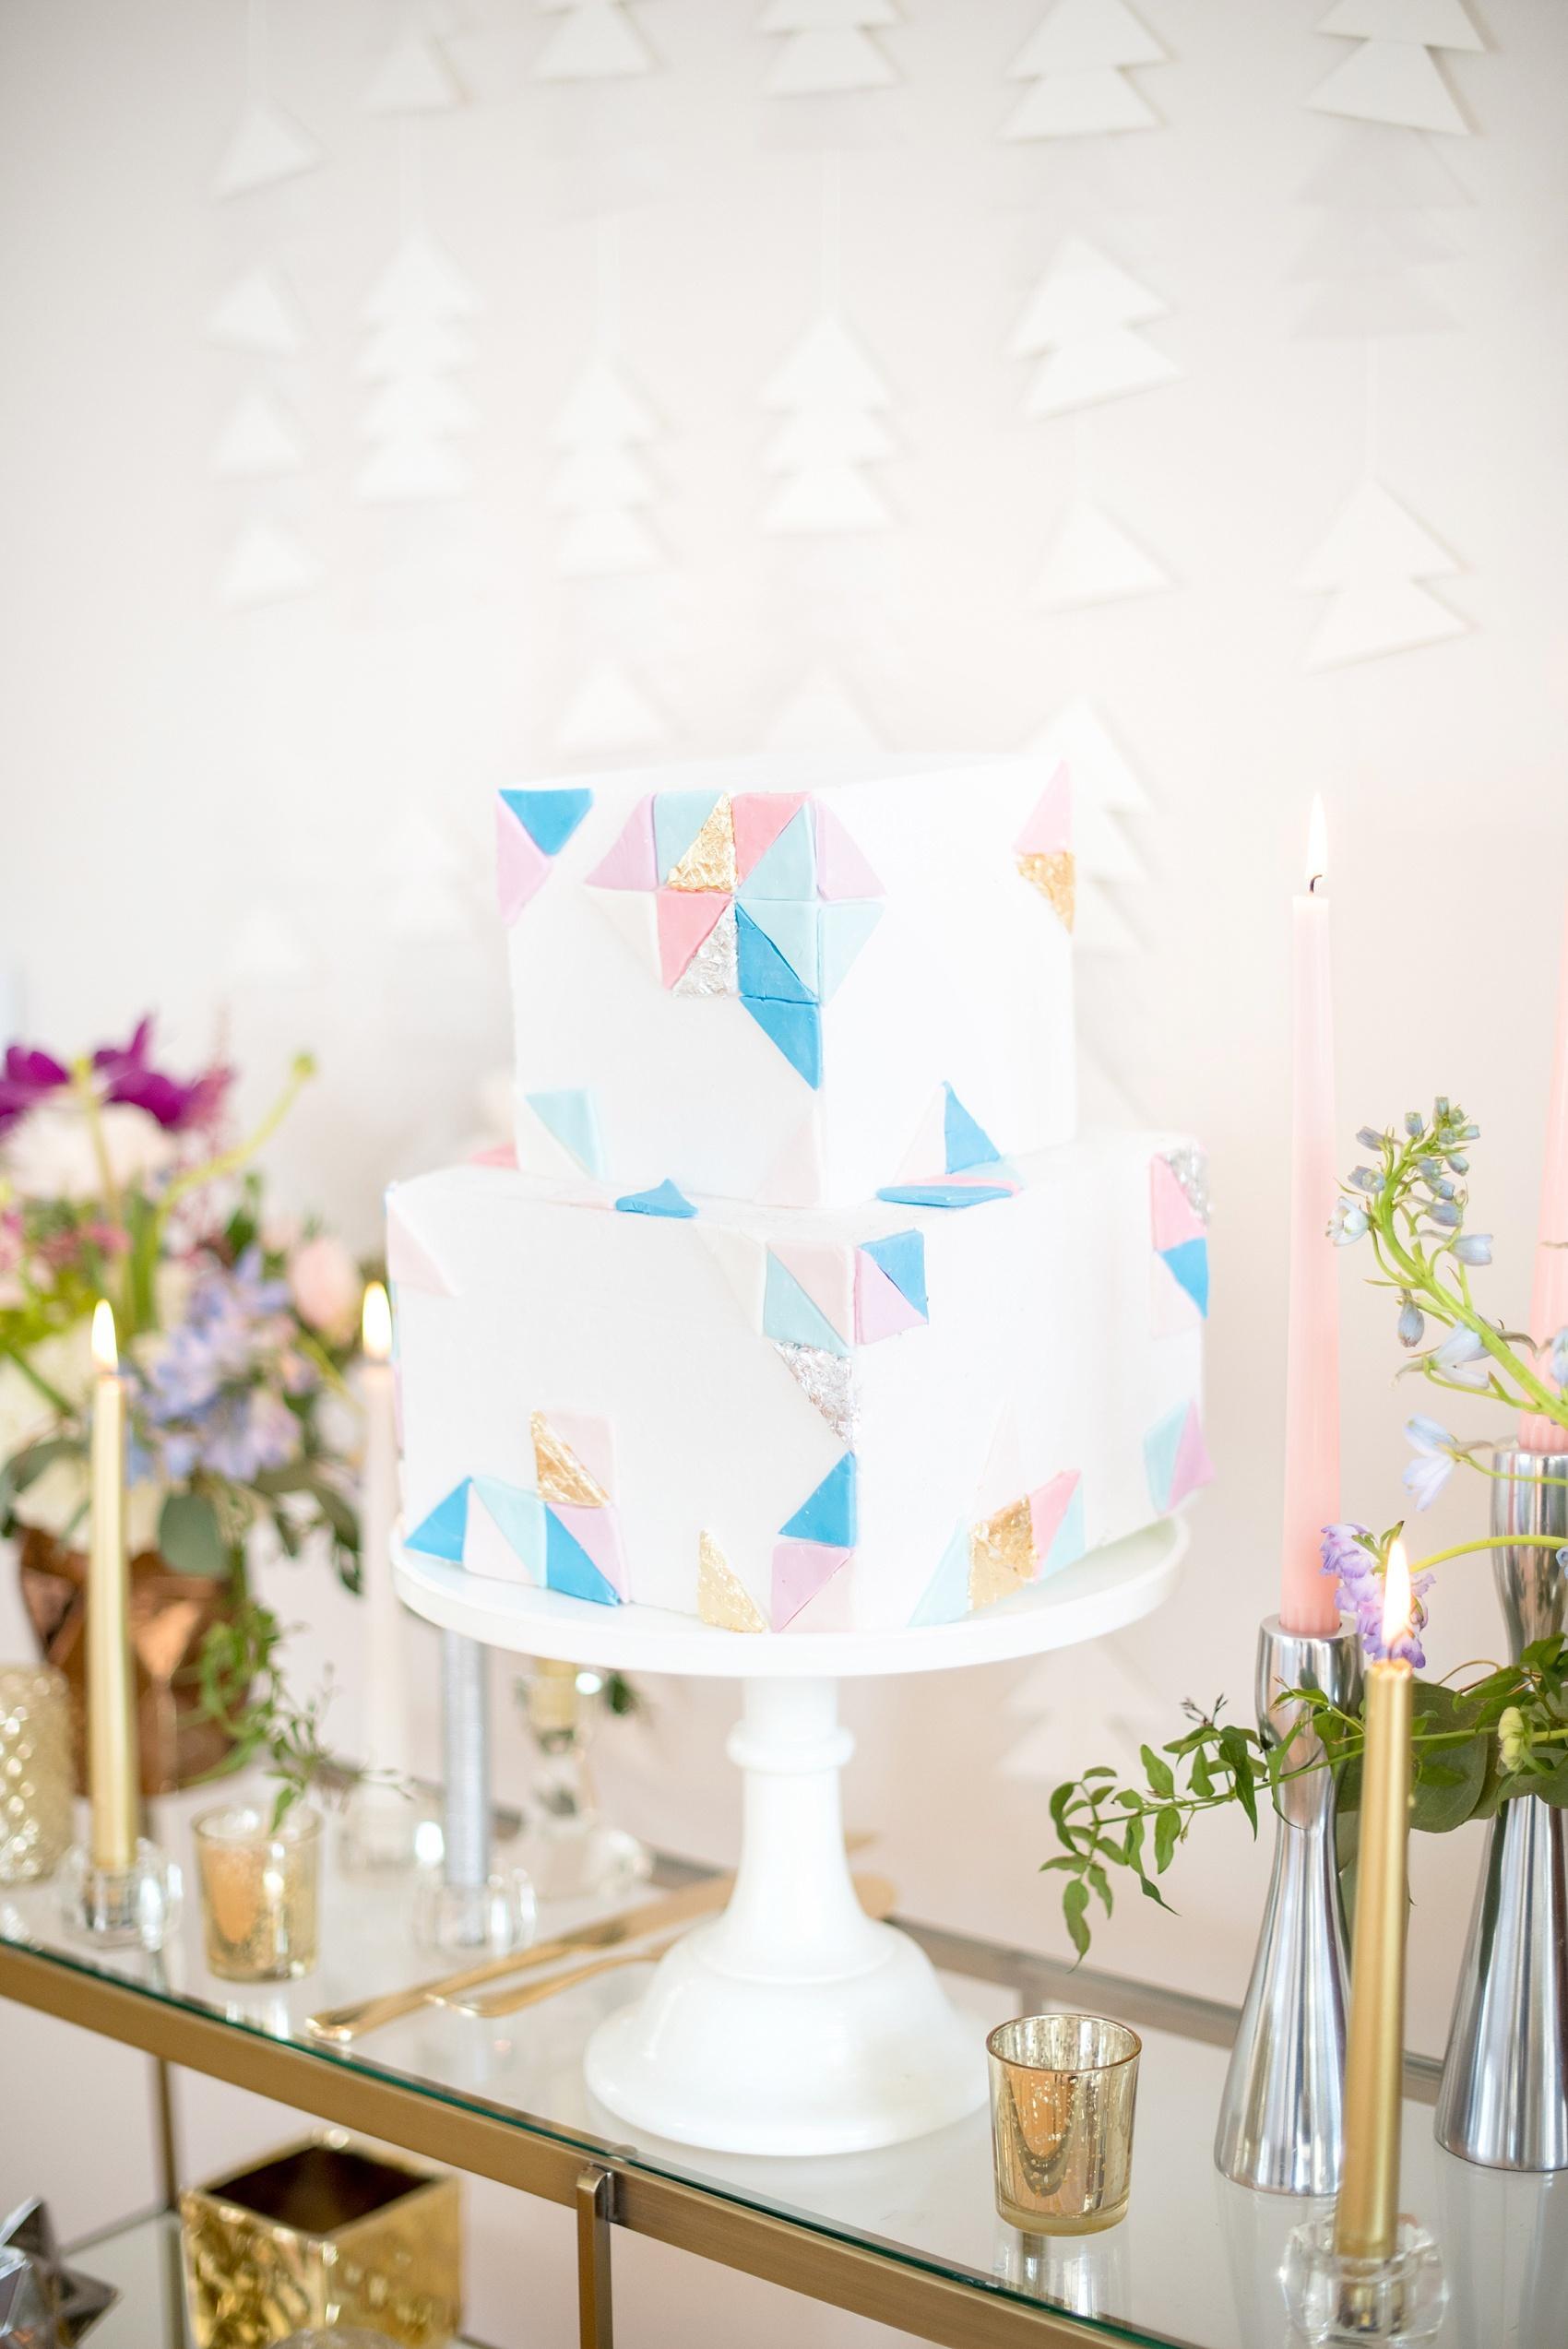 The Glass Box at 230 wedding photos by Mikkel Paige Photography. Serenity blue and Rose Quartz pink inspiration. Paper by Bella Joviality styling by Glitter Inc., flowers by Eclectic Sage and geometric cake by Sugar Euphoria.